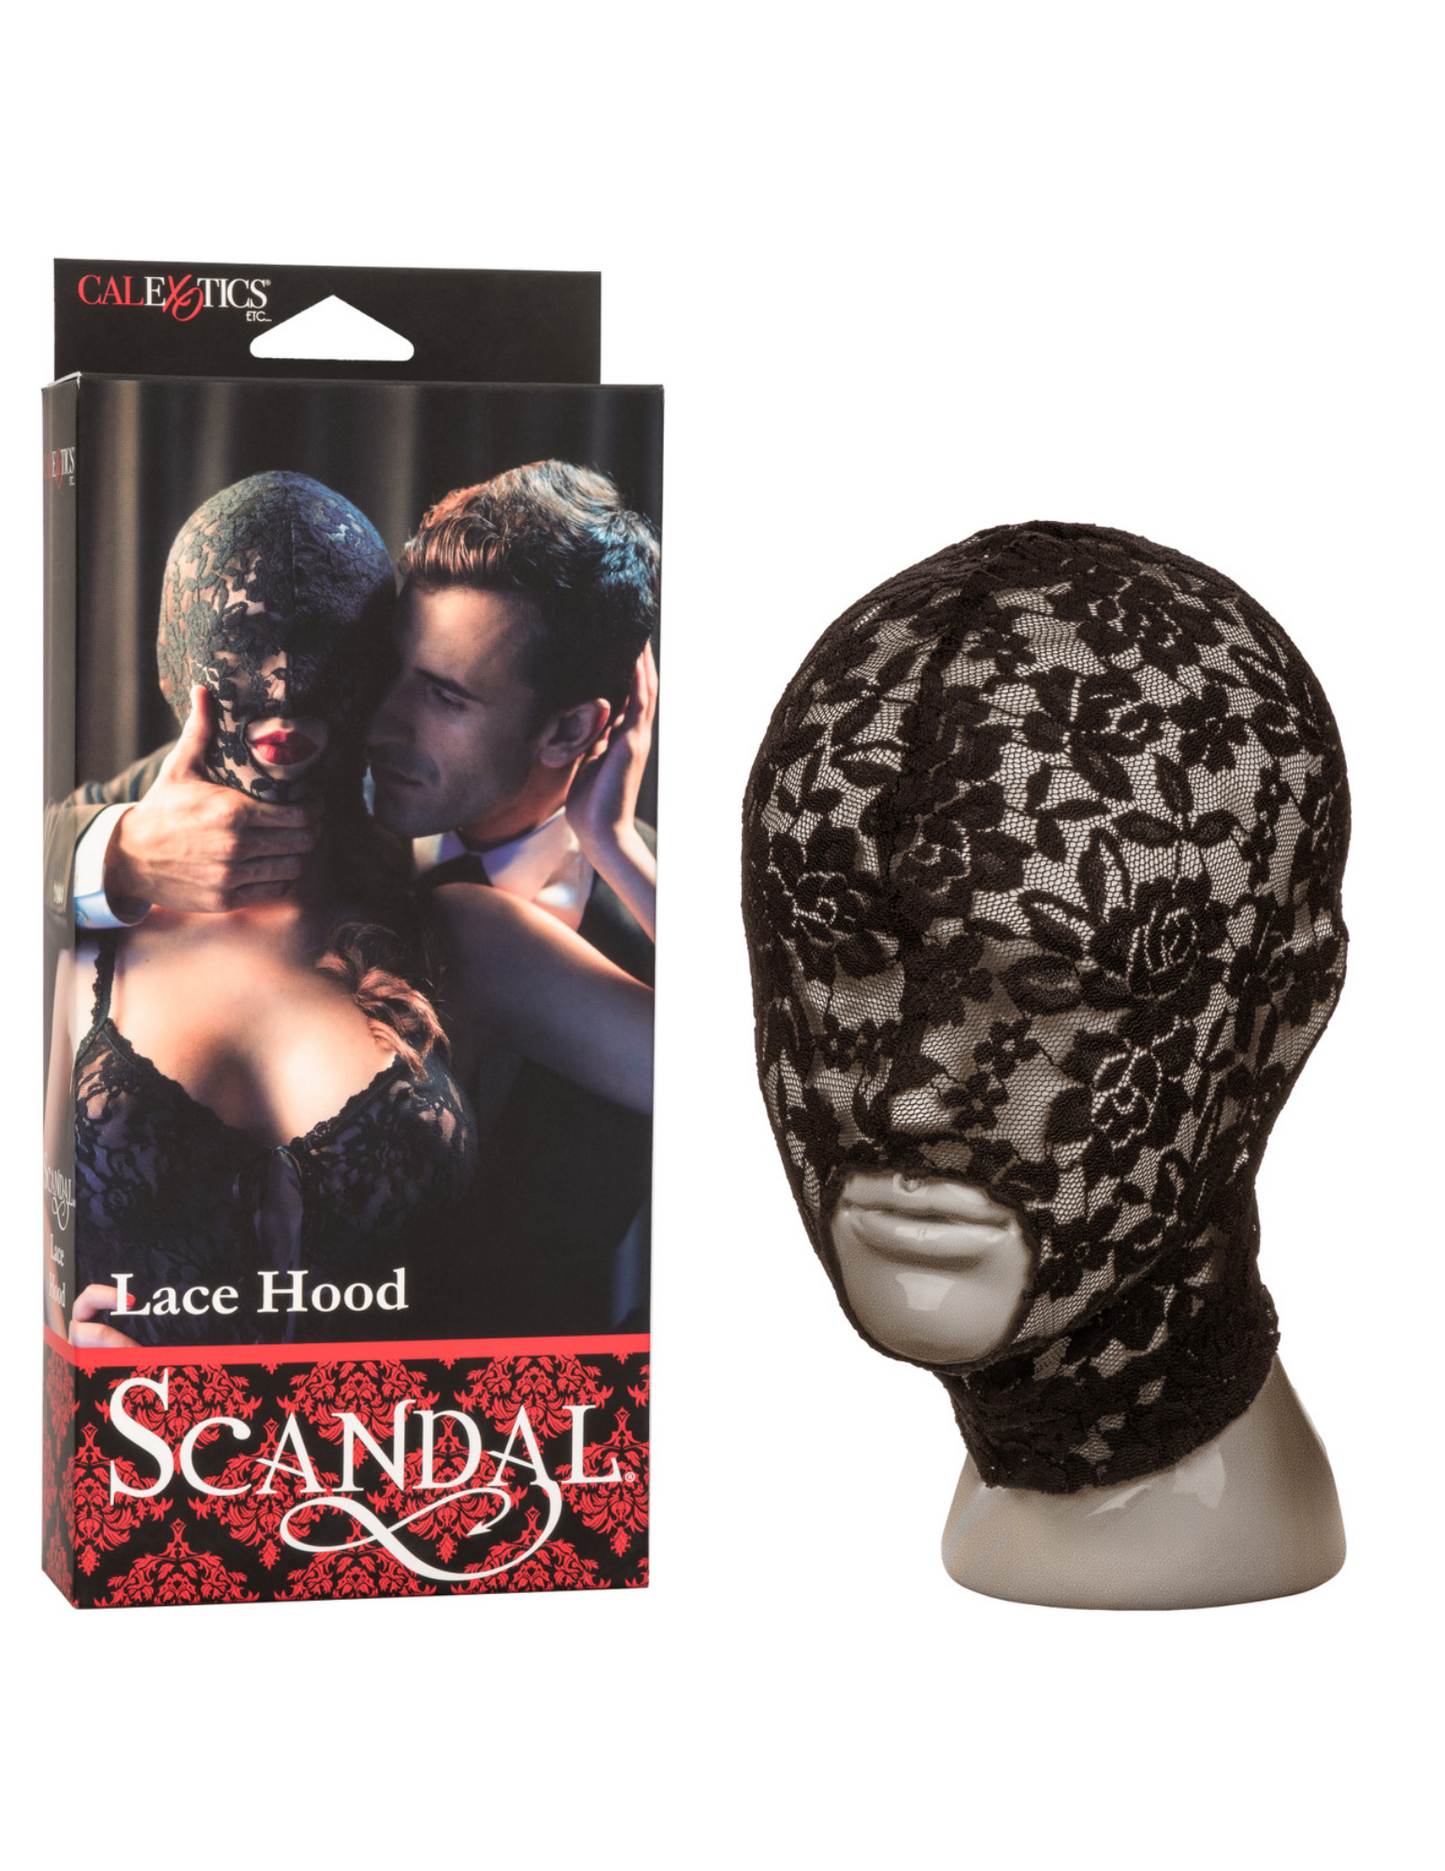 Photo of the Scandal Lace Hood (black) from CalExotics, next to its box.